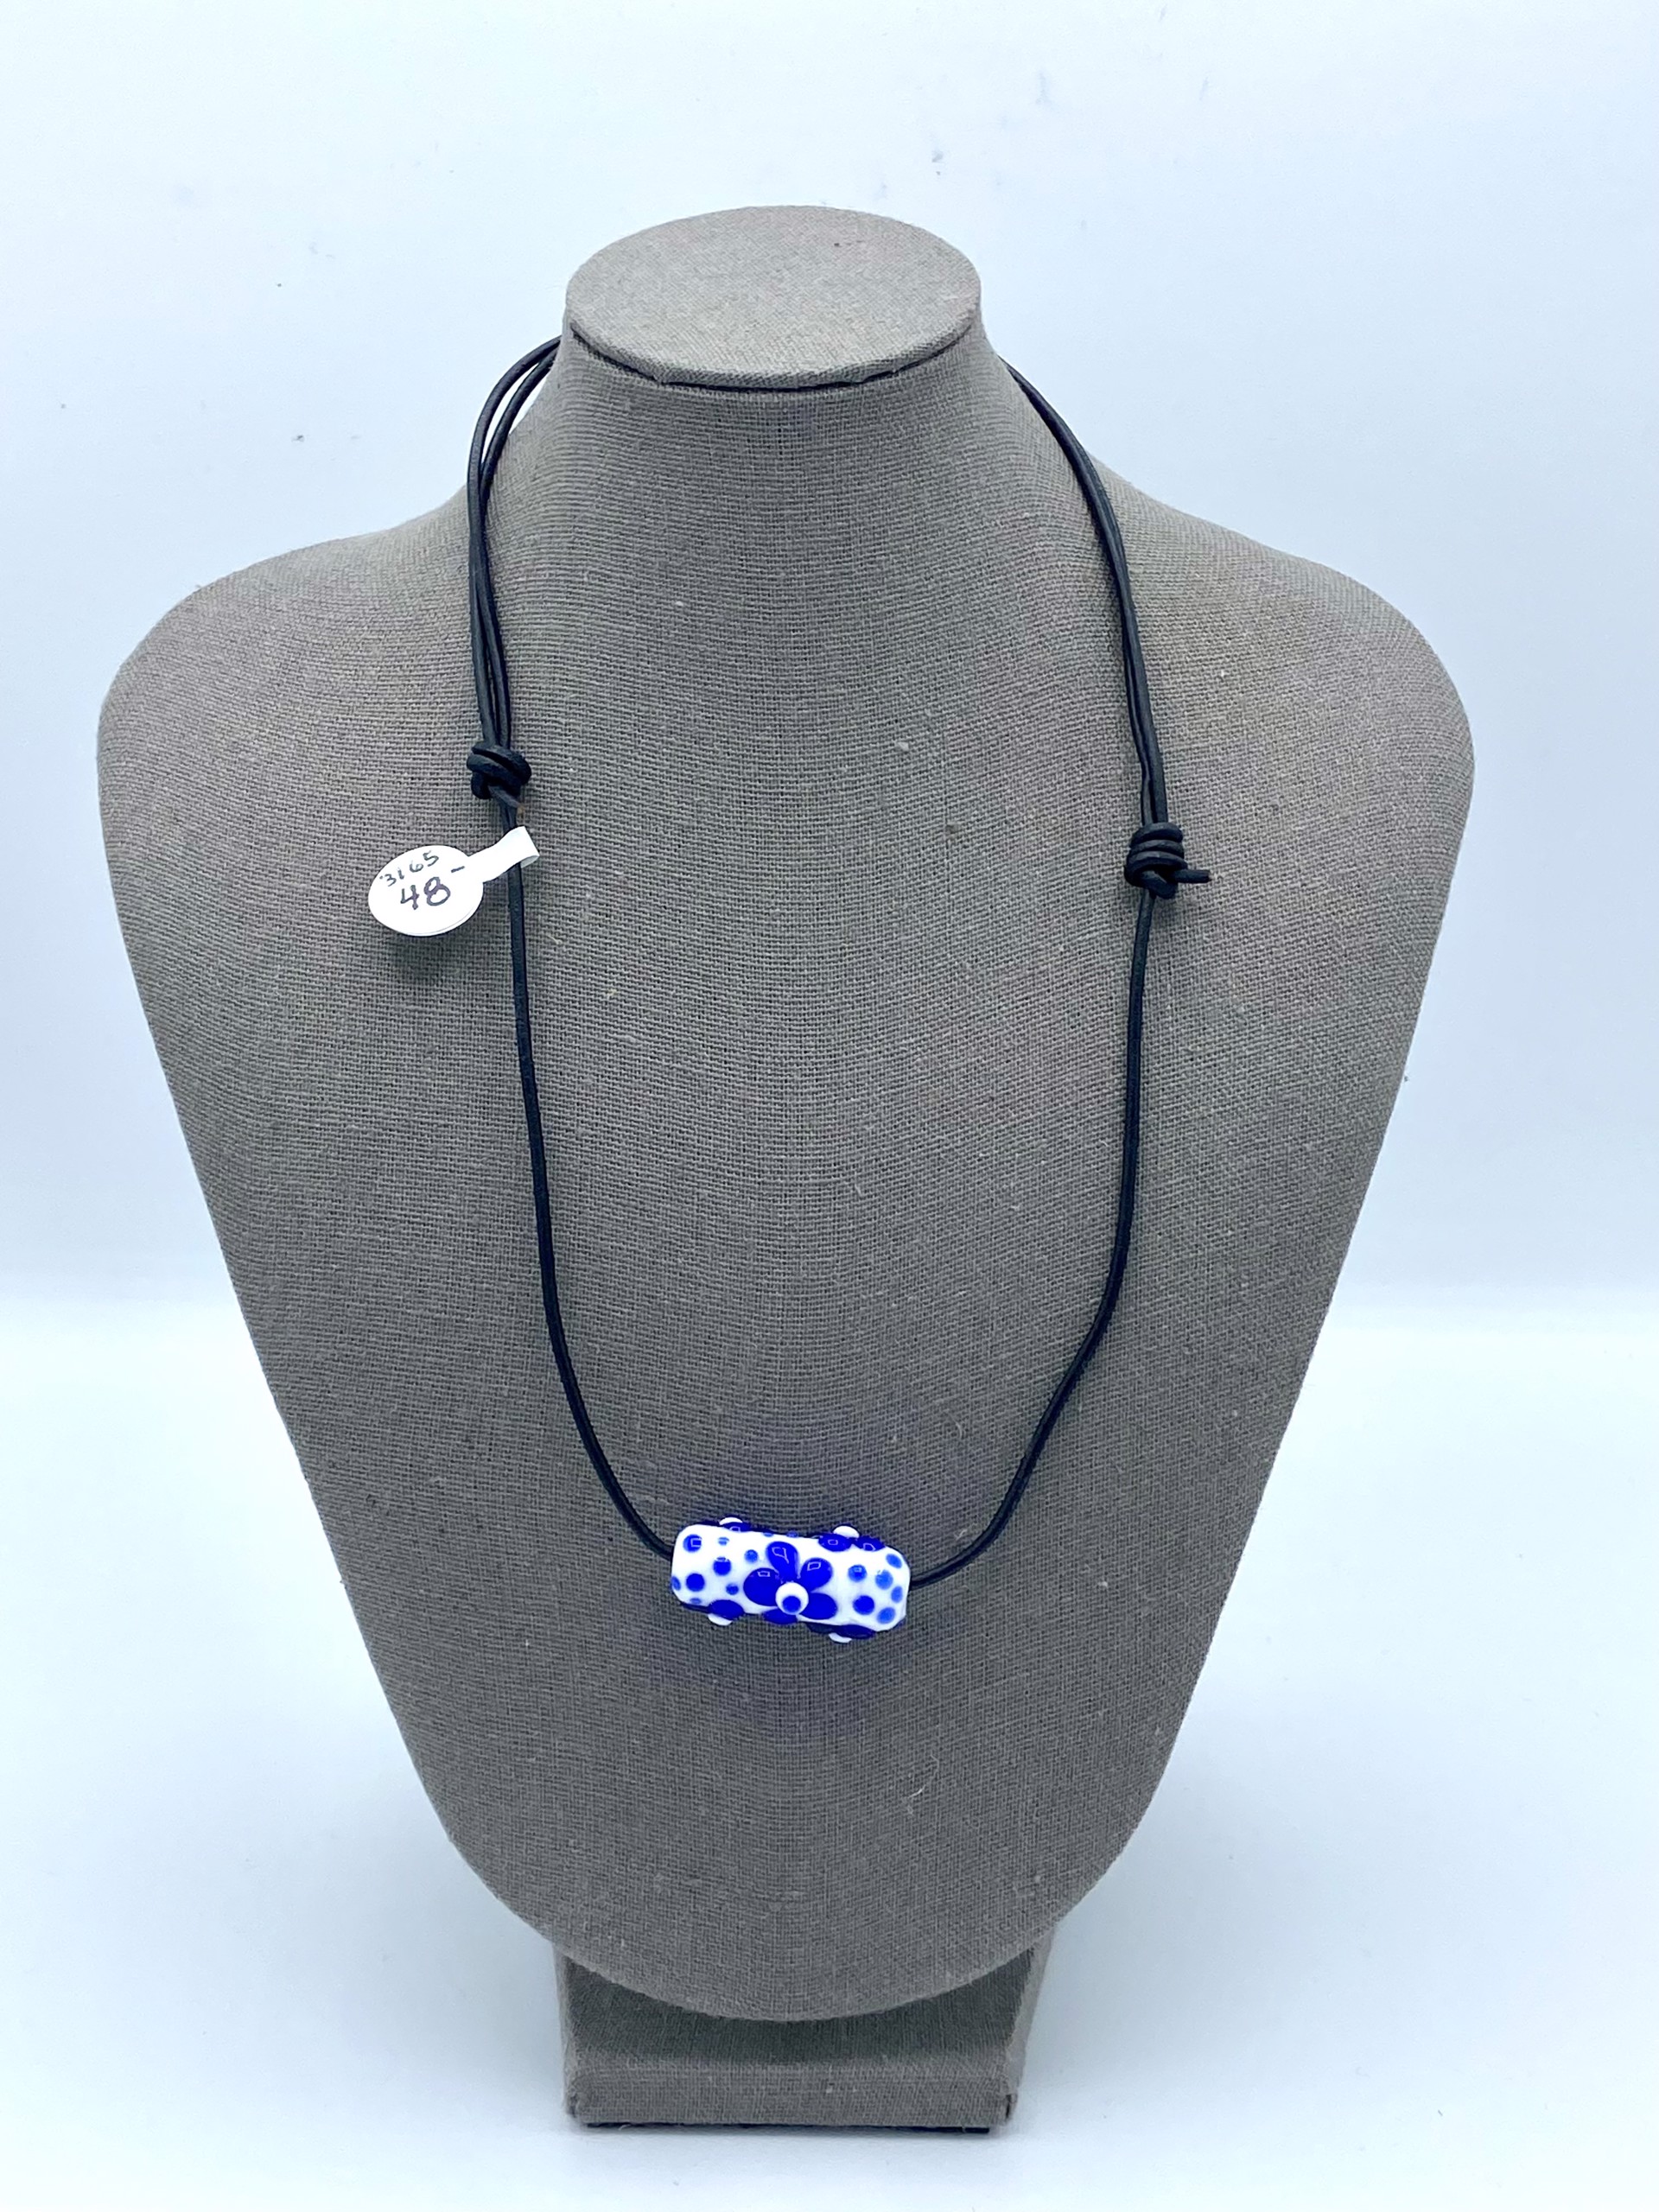 China Blue Flowers Necklace by Emelie Hebert